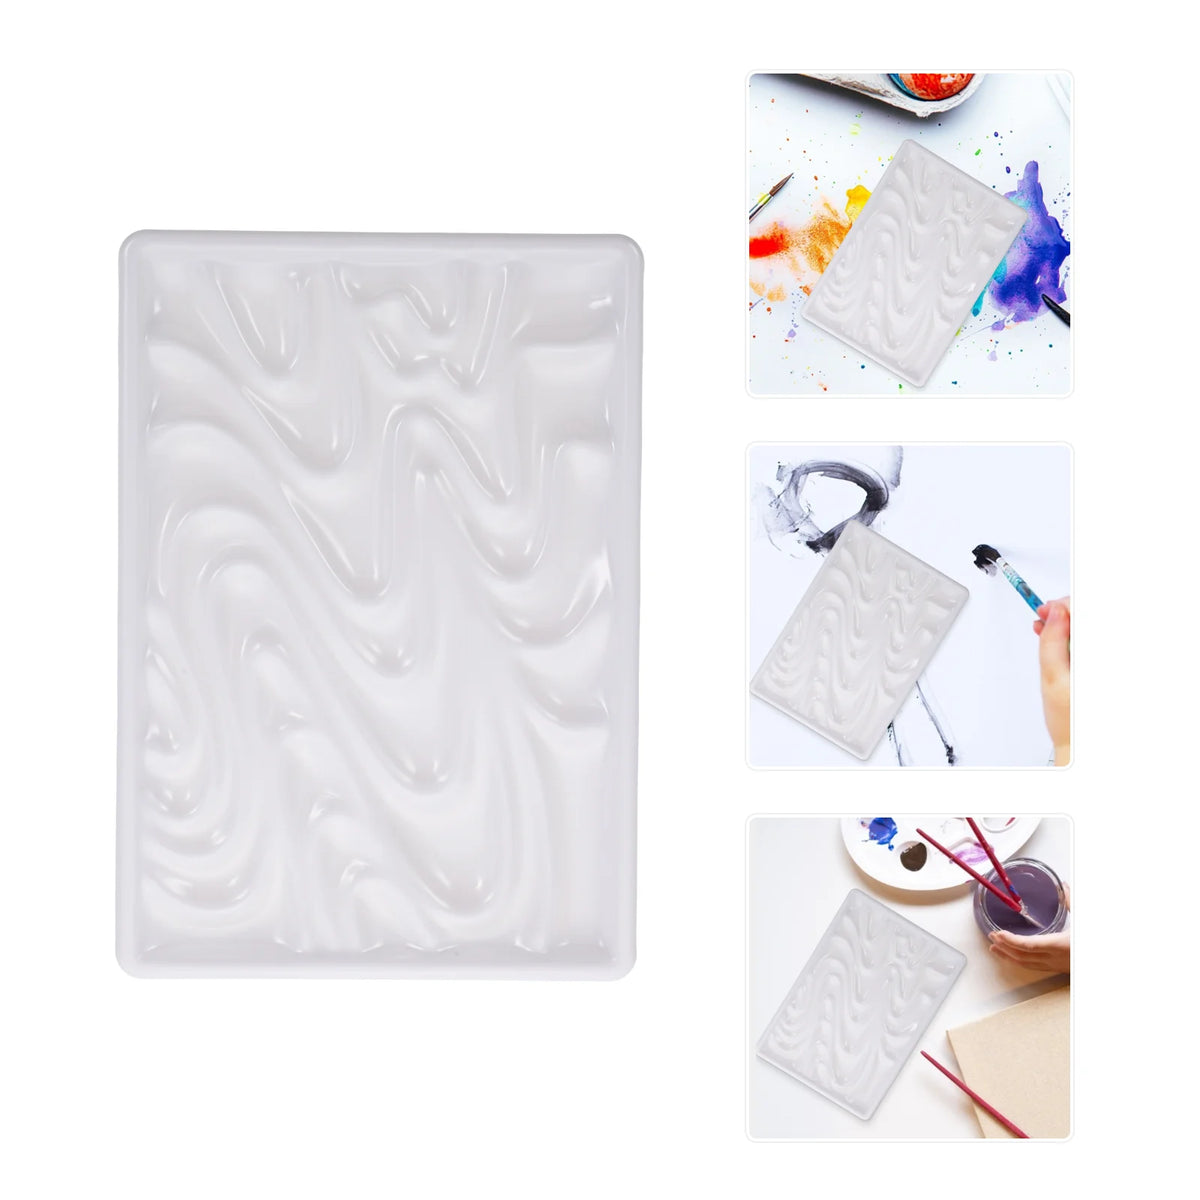 AOOKMIYA Wave Palette Porcelain Paint Painting Board Gouache Tray Rack